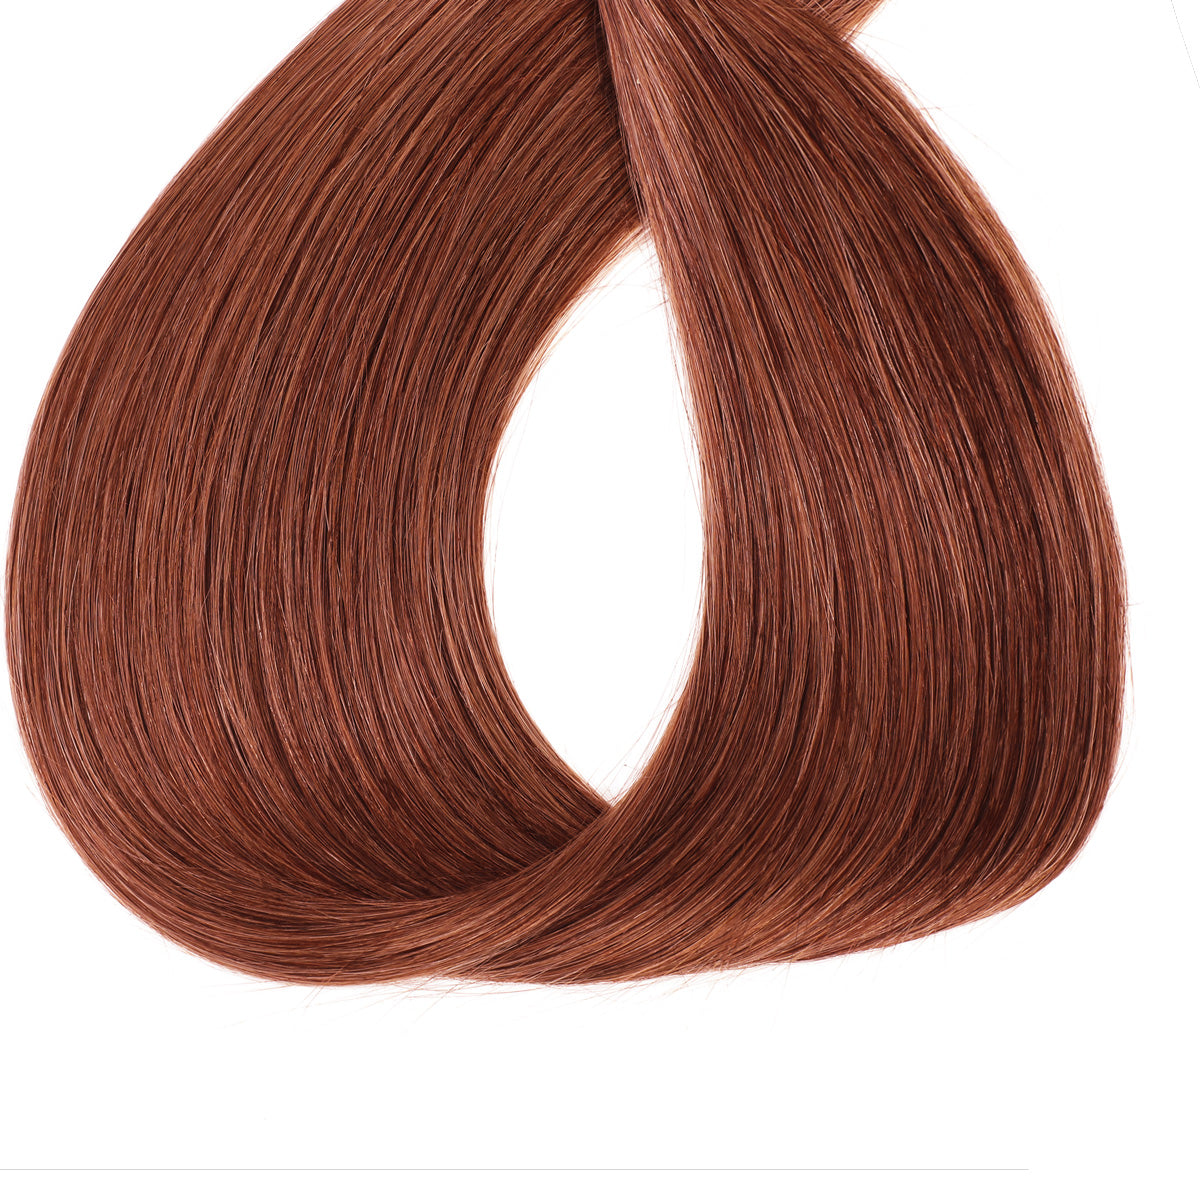 Dark Copper Hair Extensions also available in curly hair and different lengths.